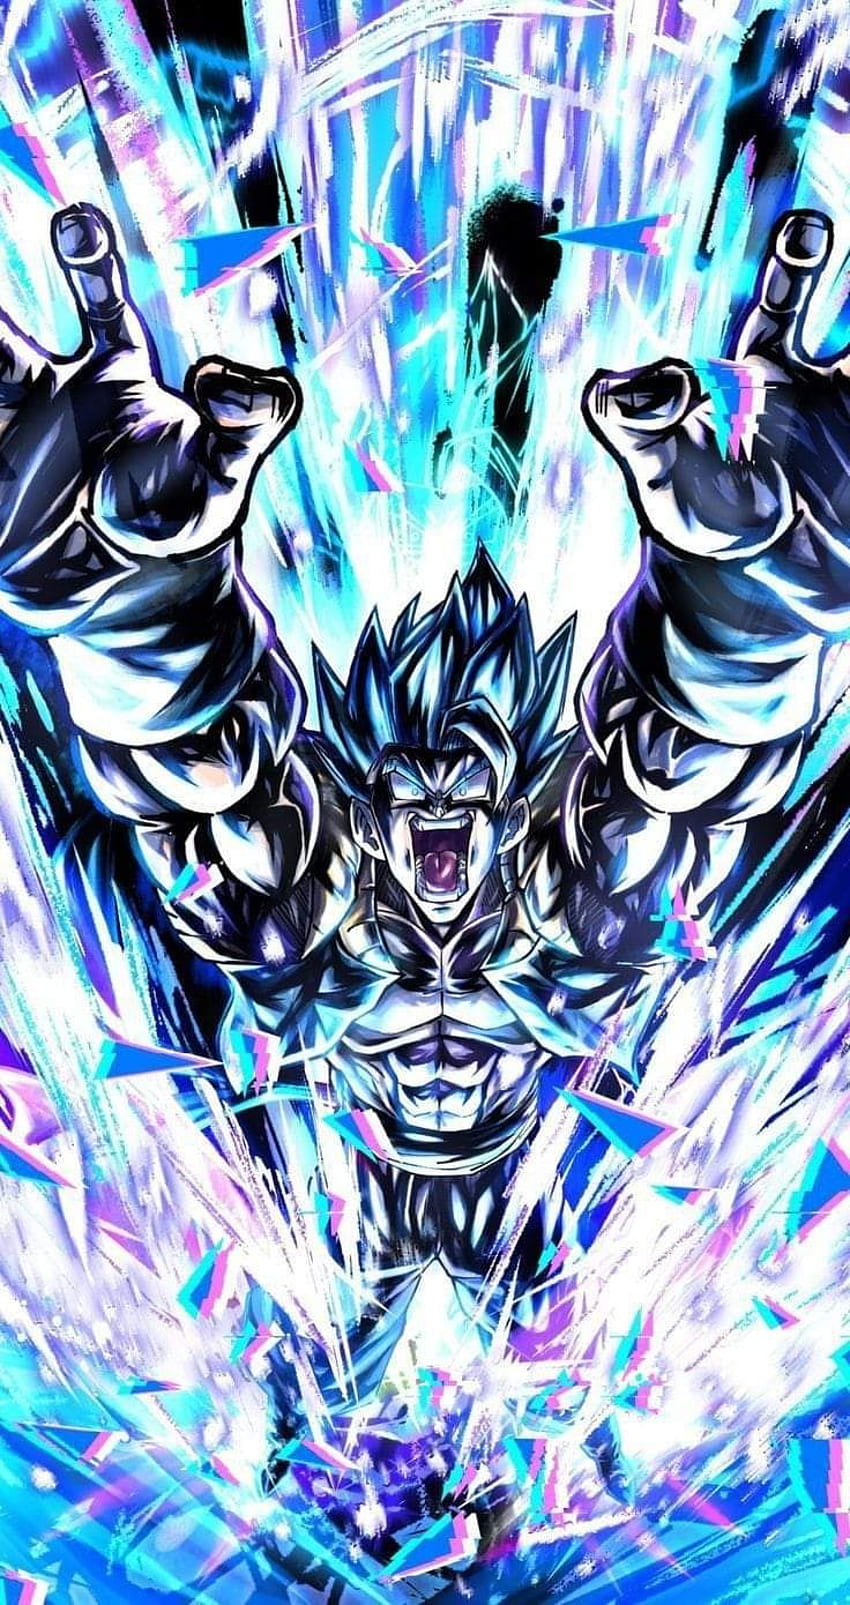 Gogeta wallpaper by the_prabhjot_singh - Download on ZEDGE™ | bd7f